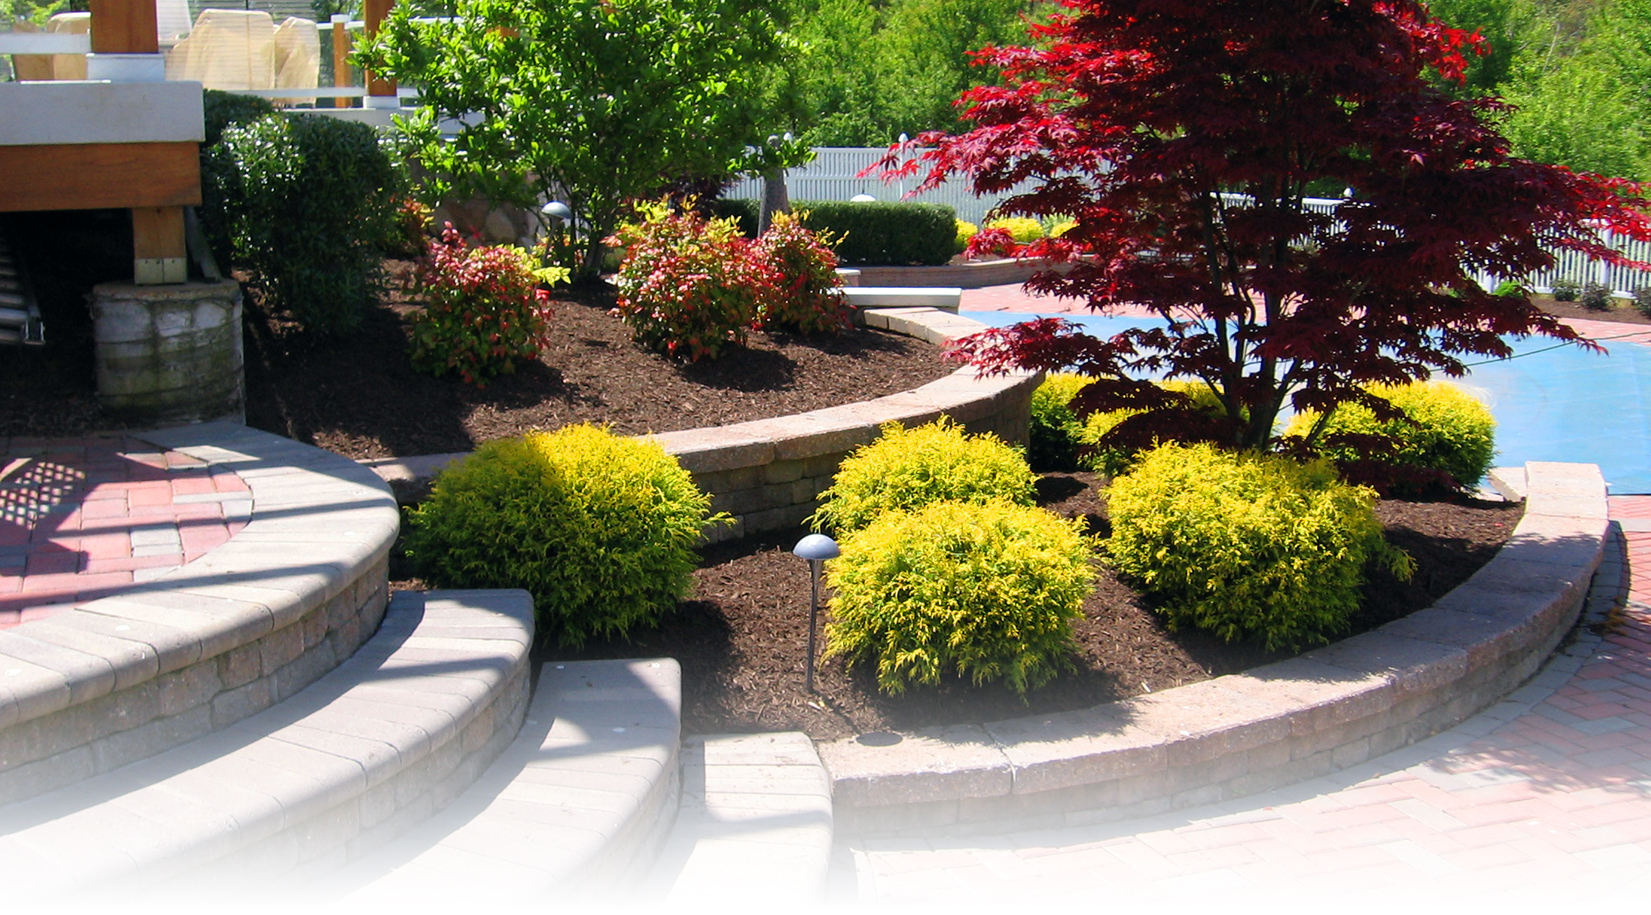 Sls South Jersey Landscaping Design And, Landscaping Companies In South Jersey